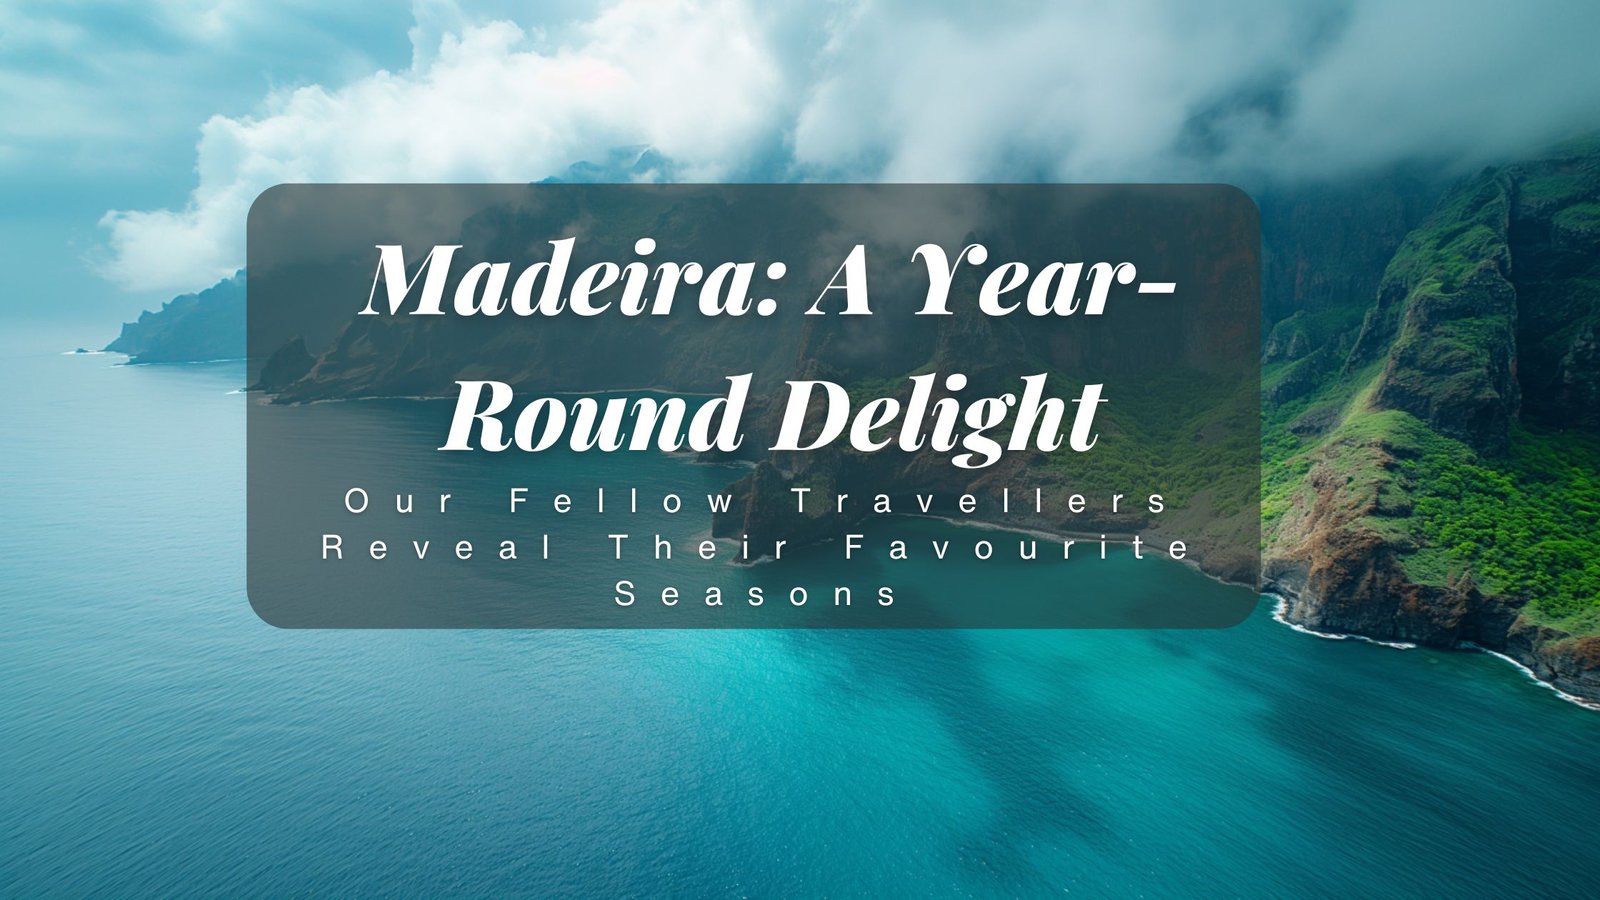 Madeira: A Year-Round Delight – Our Fellow Travellers Reveal Their Favourite Seasons